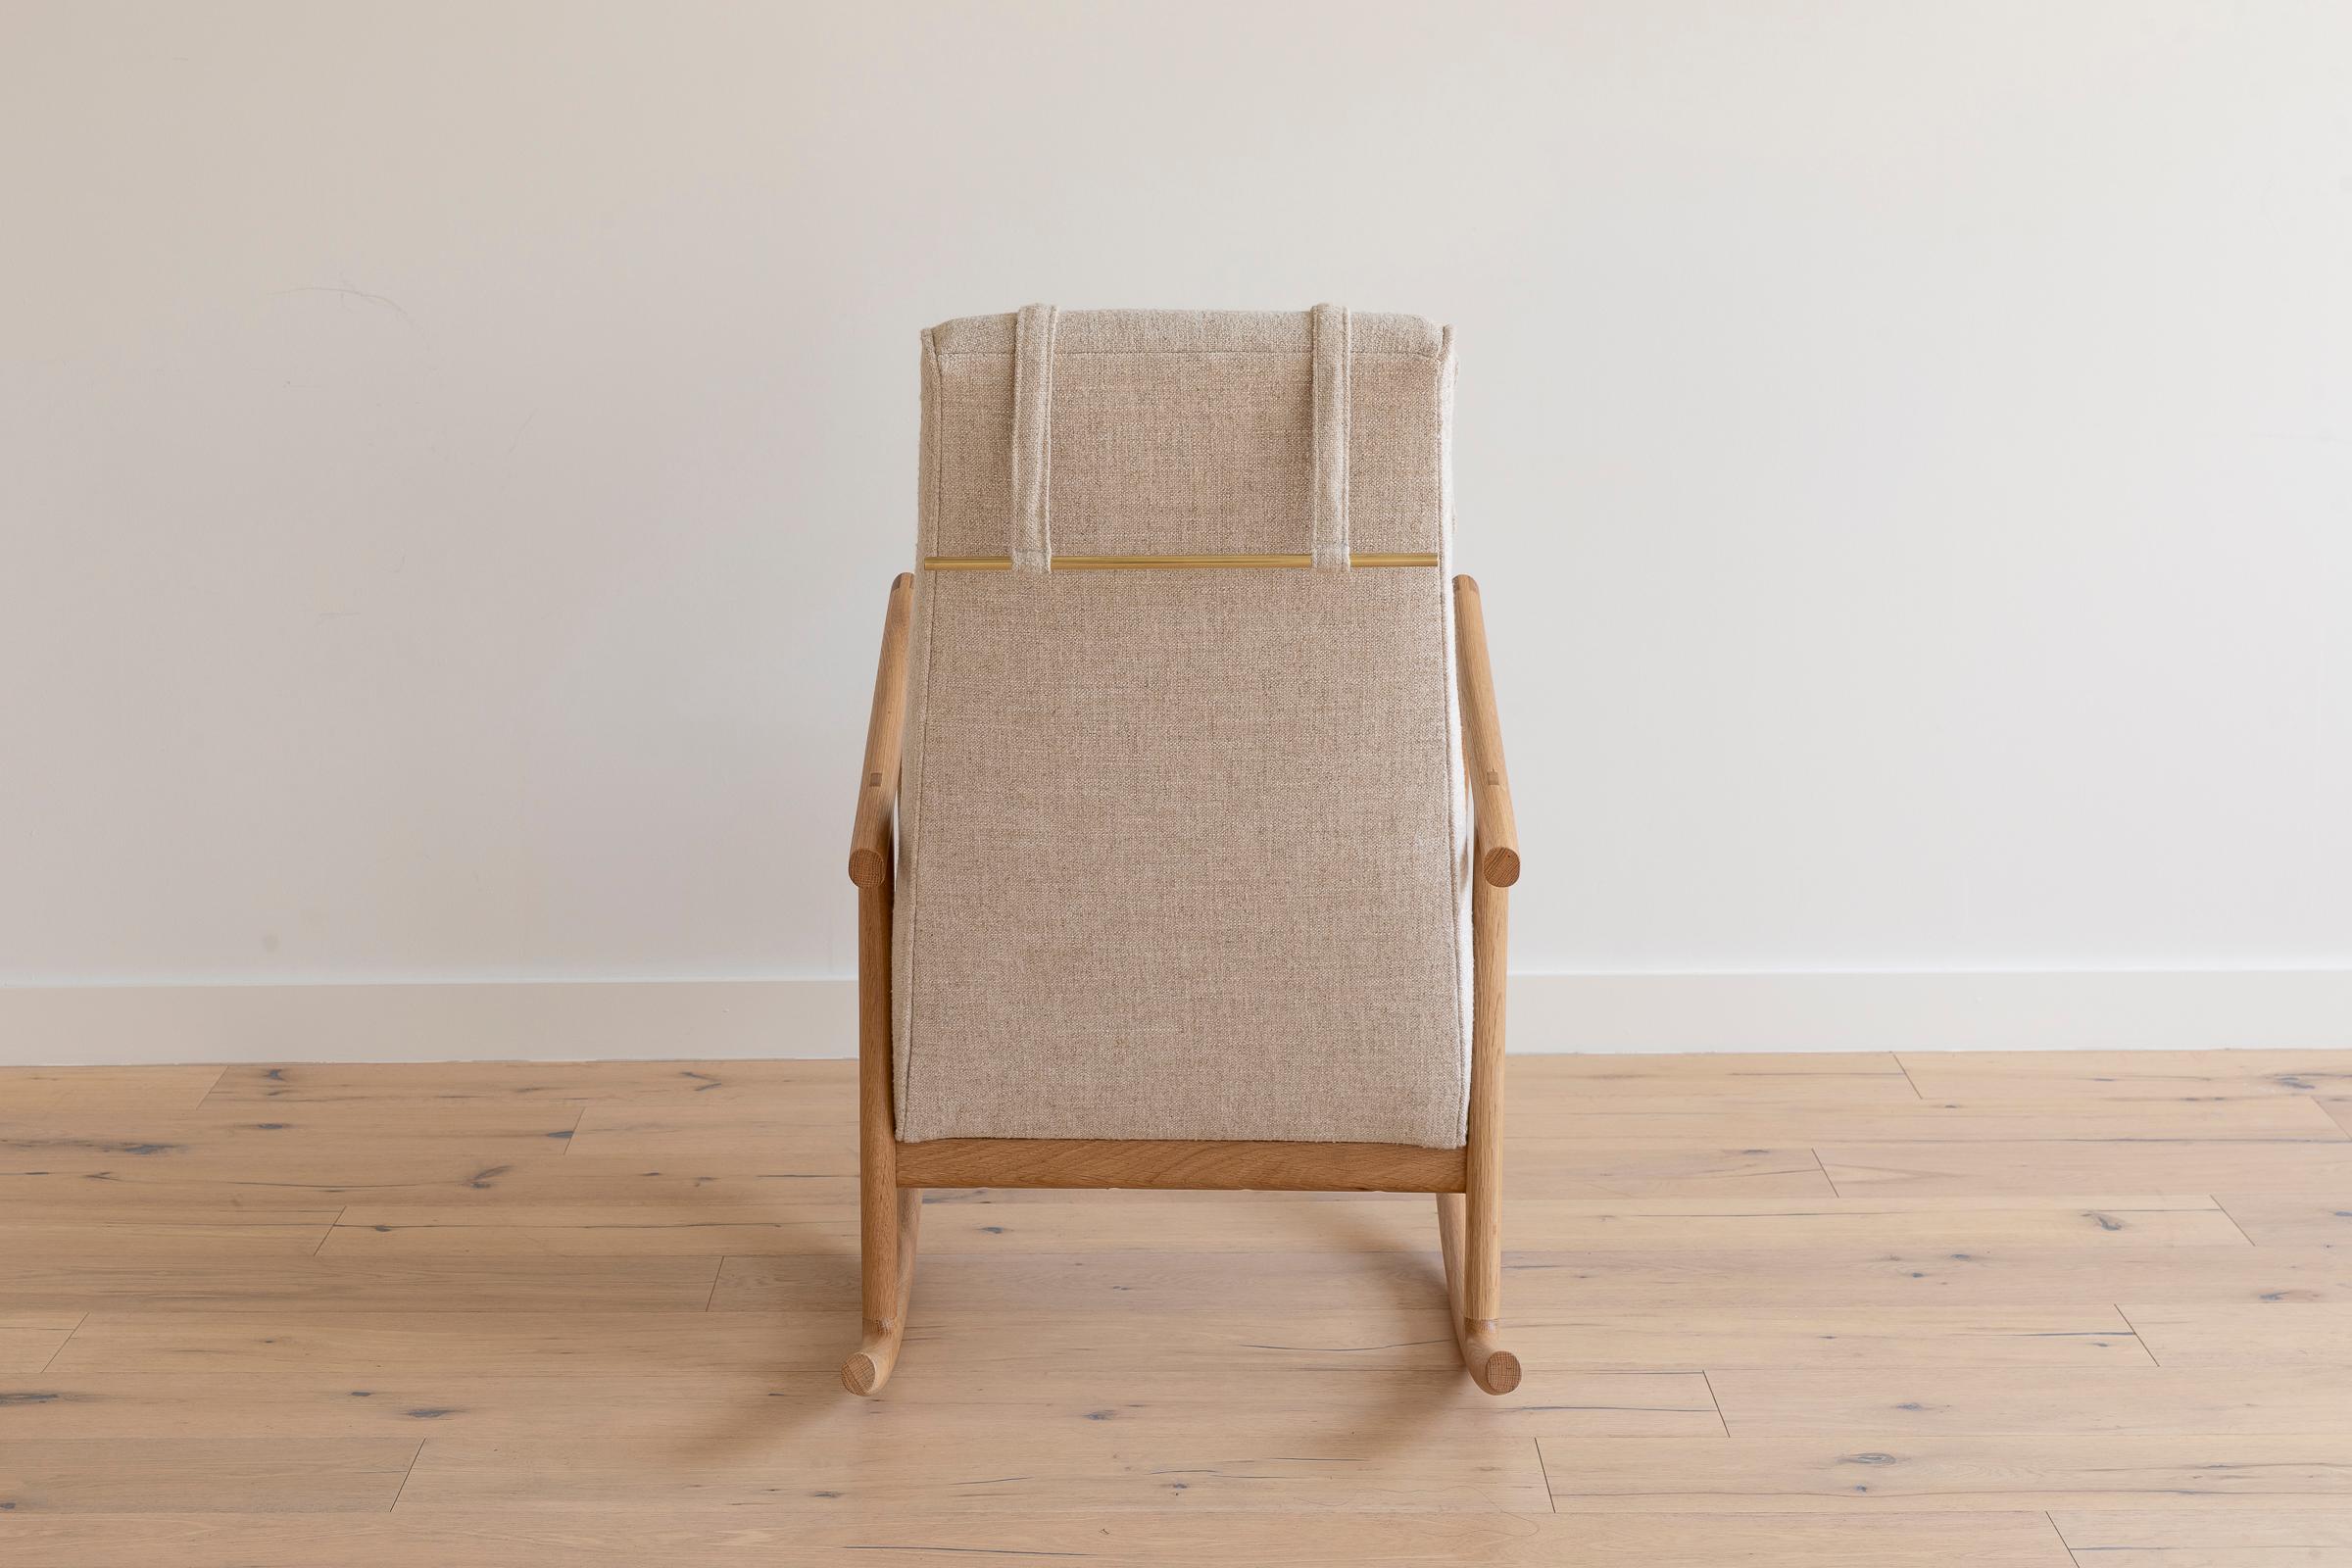 American Earl White Oak, Ivory Textured Linen Moresby Rocking Chair For Sale